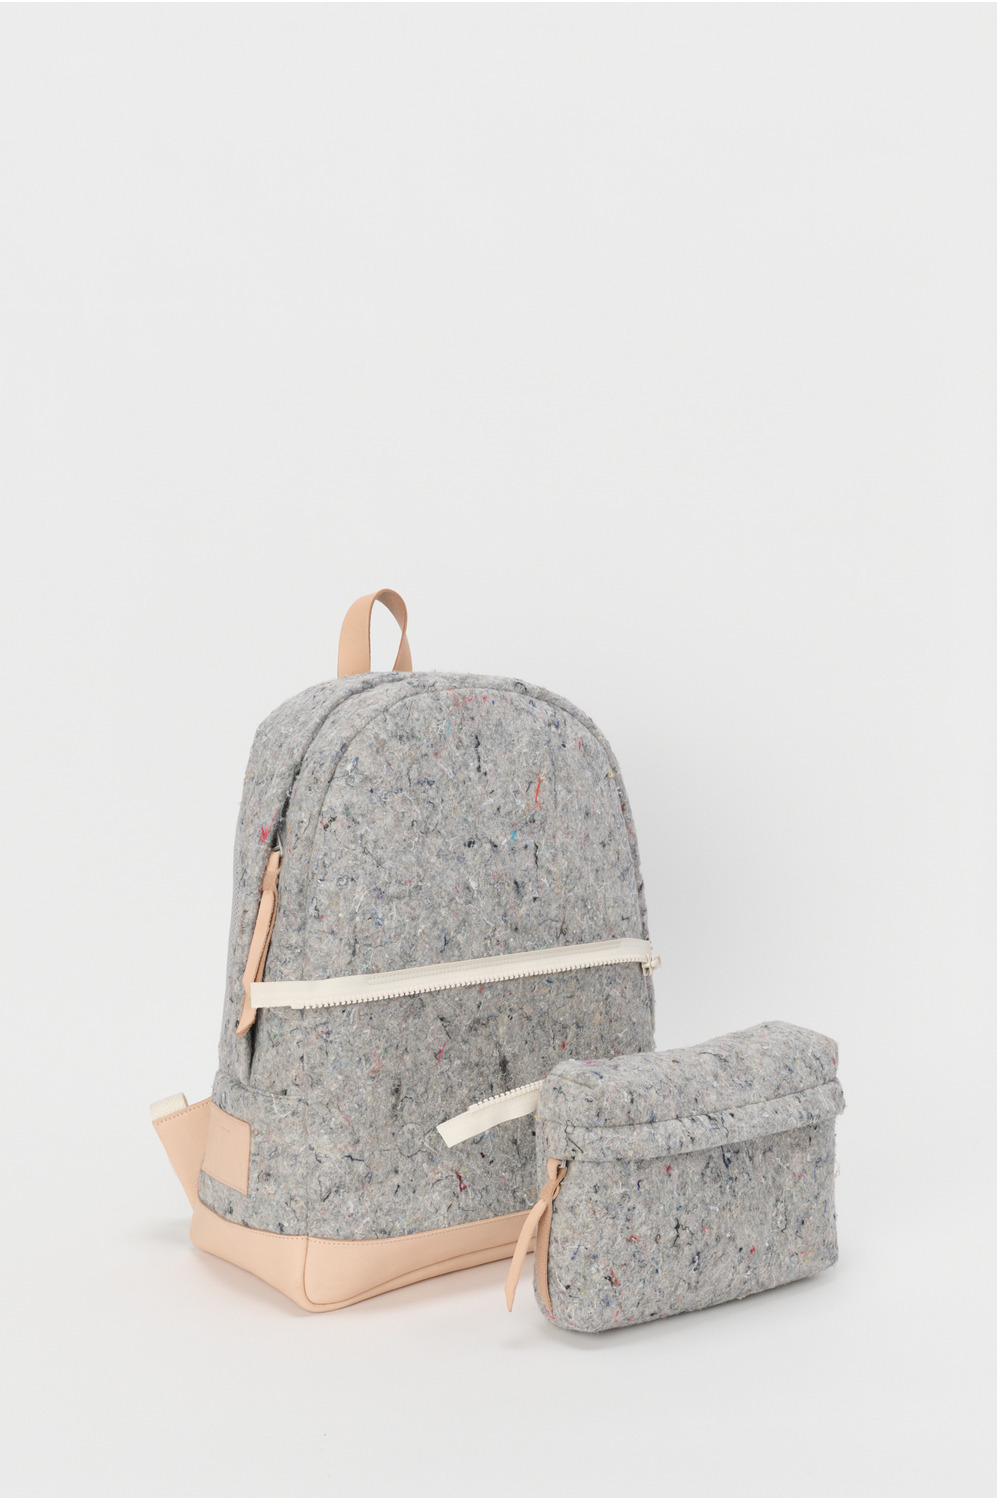 Recycled felt) backpack 詳細画像 mix gray/natural 4